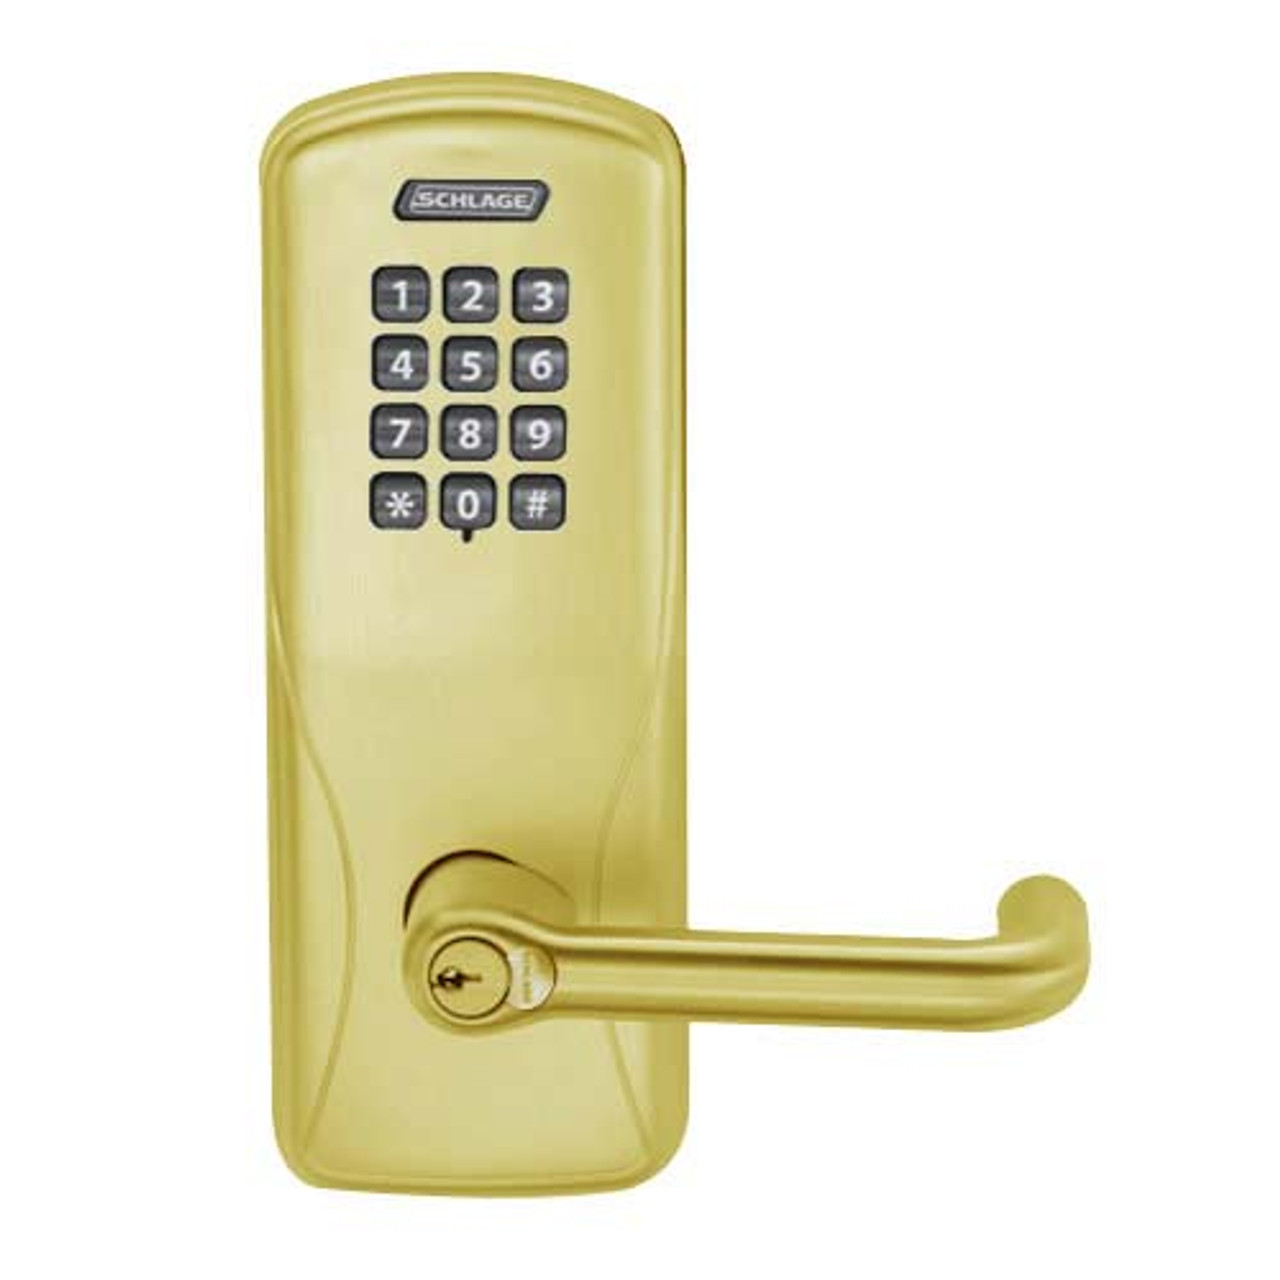 CO100-MS-70-KP-TLR-GD-29R-605 Schlage Standalone Mortise Electronic Keypad locks in Bright Brass